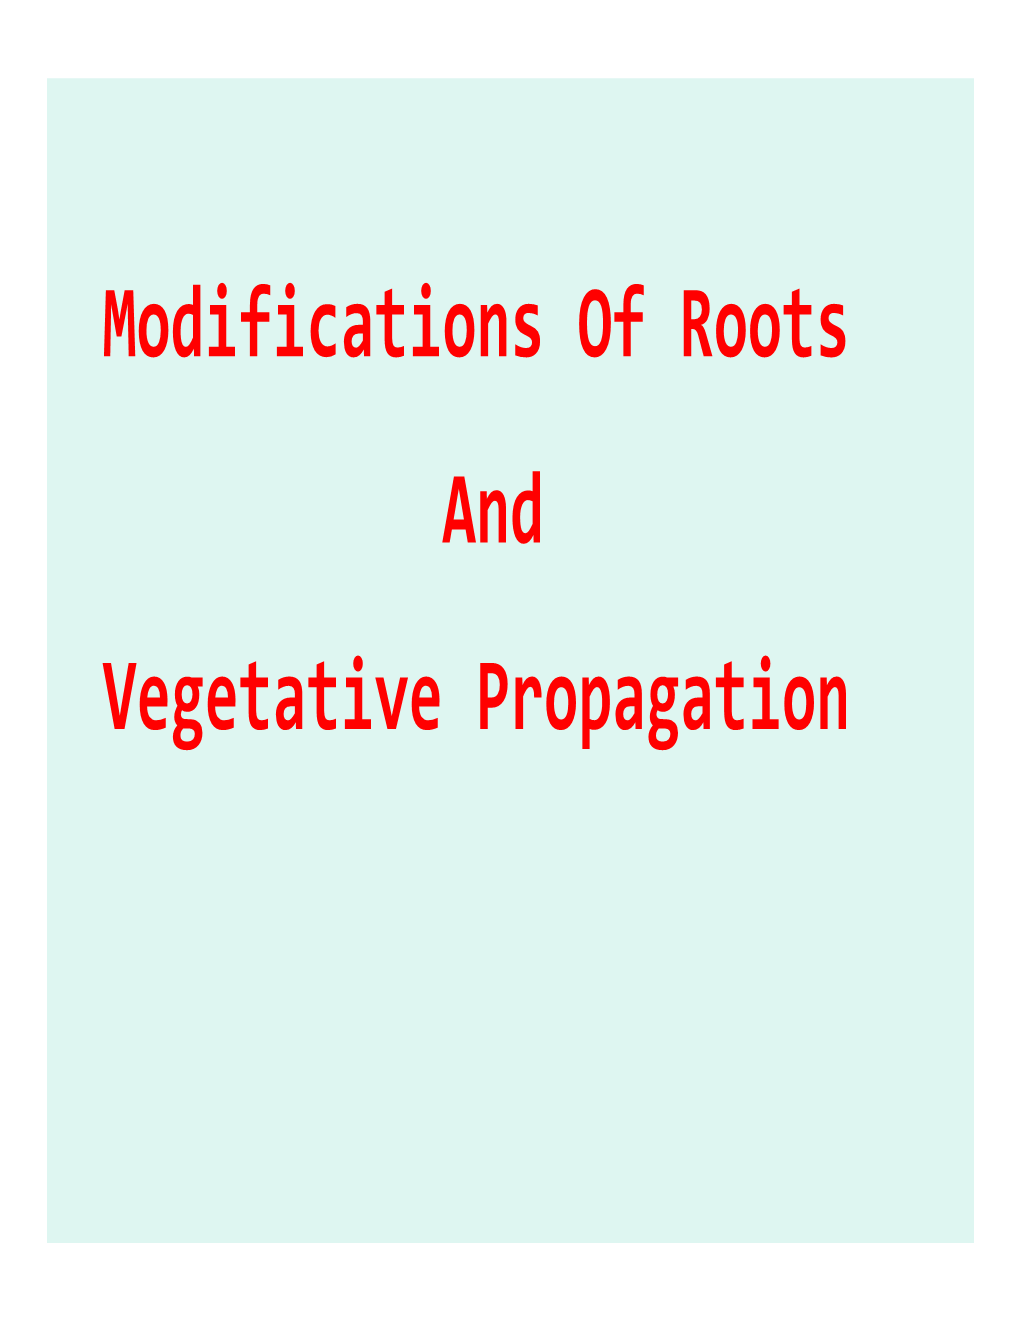 Modifications of Roots and Vegetative Propagation • the Root Is the Underground, Non-Green Part of the Plant